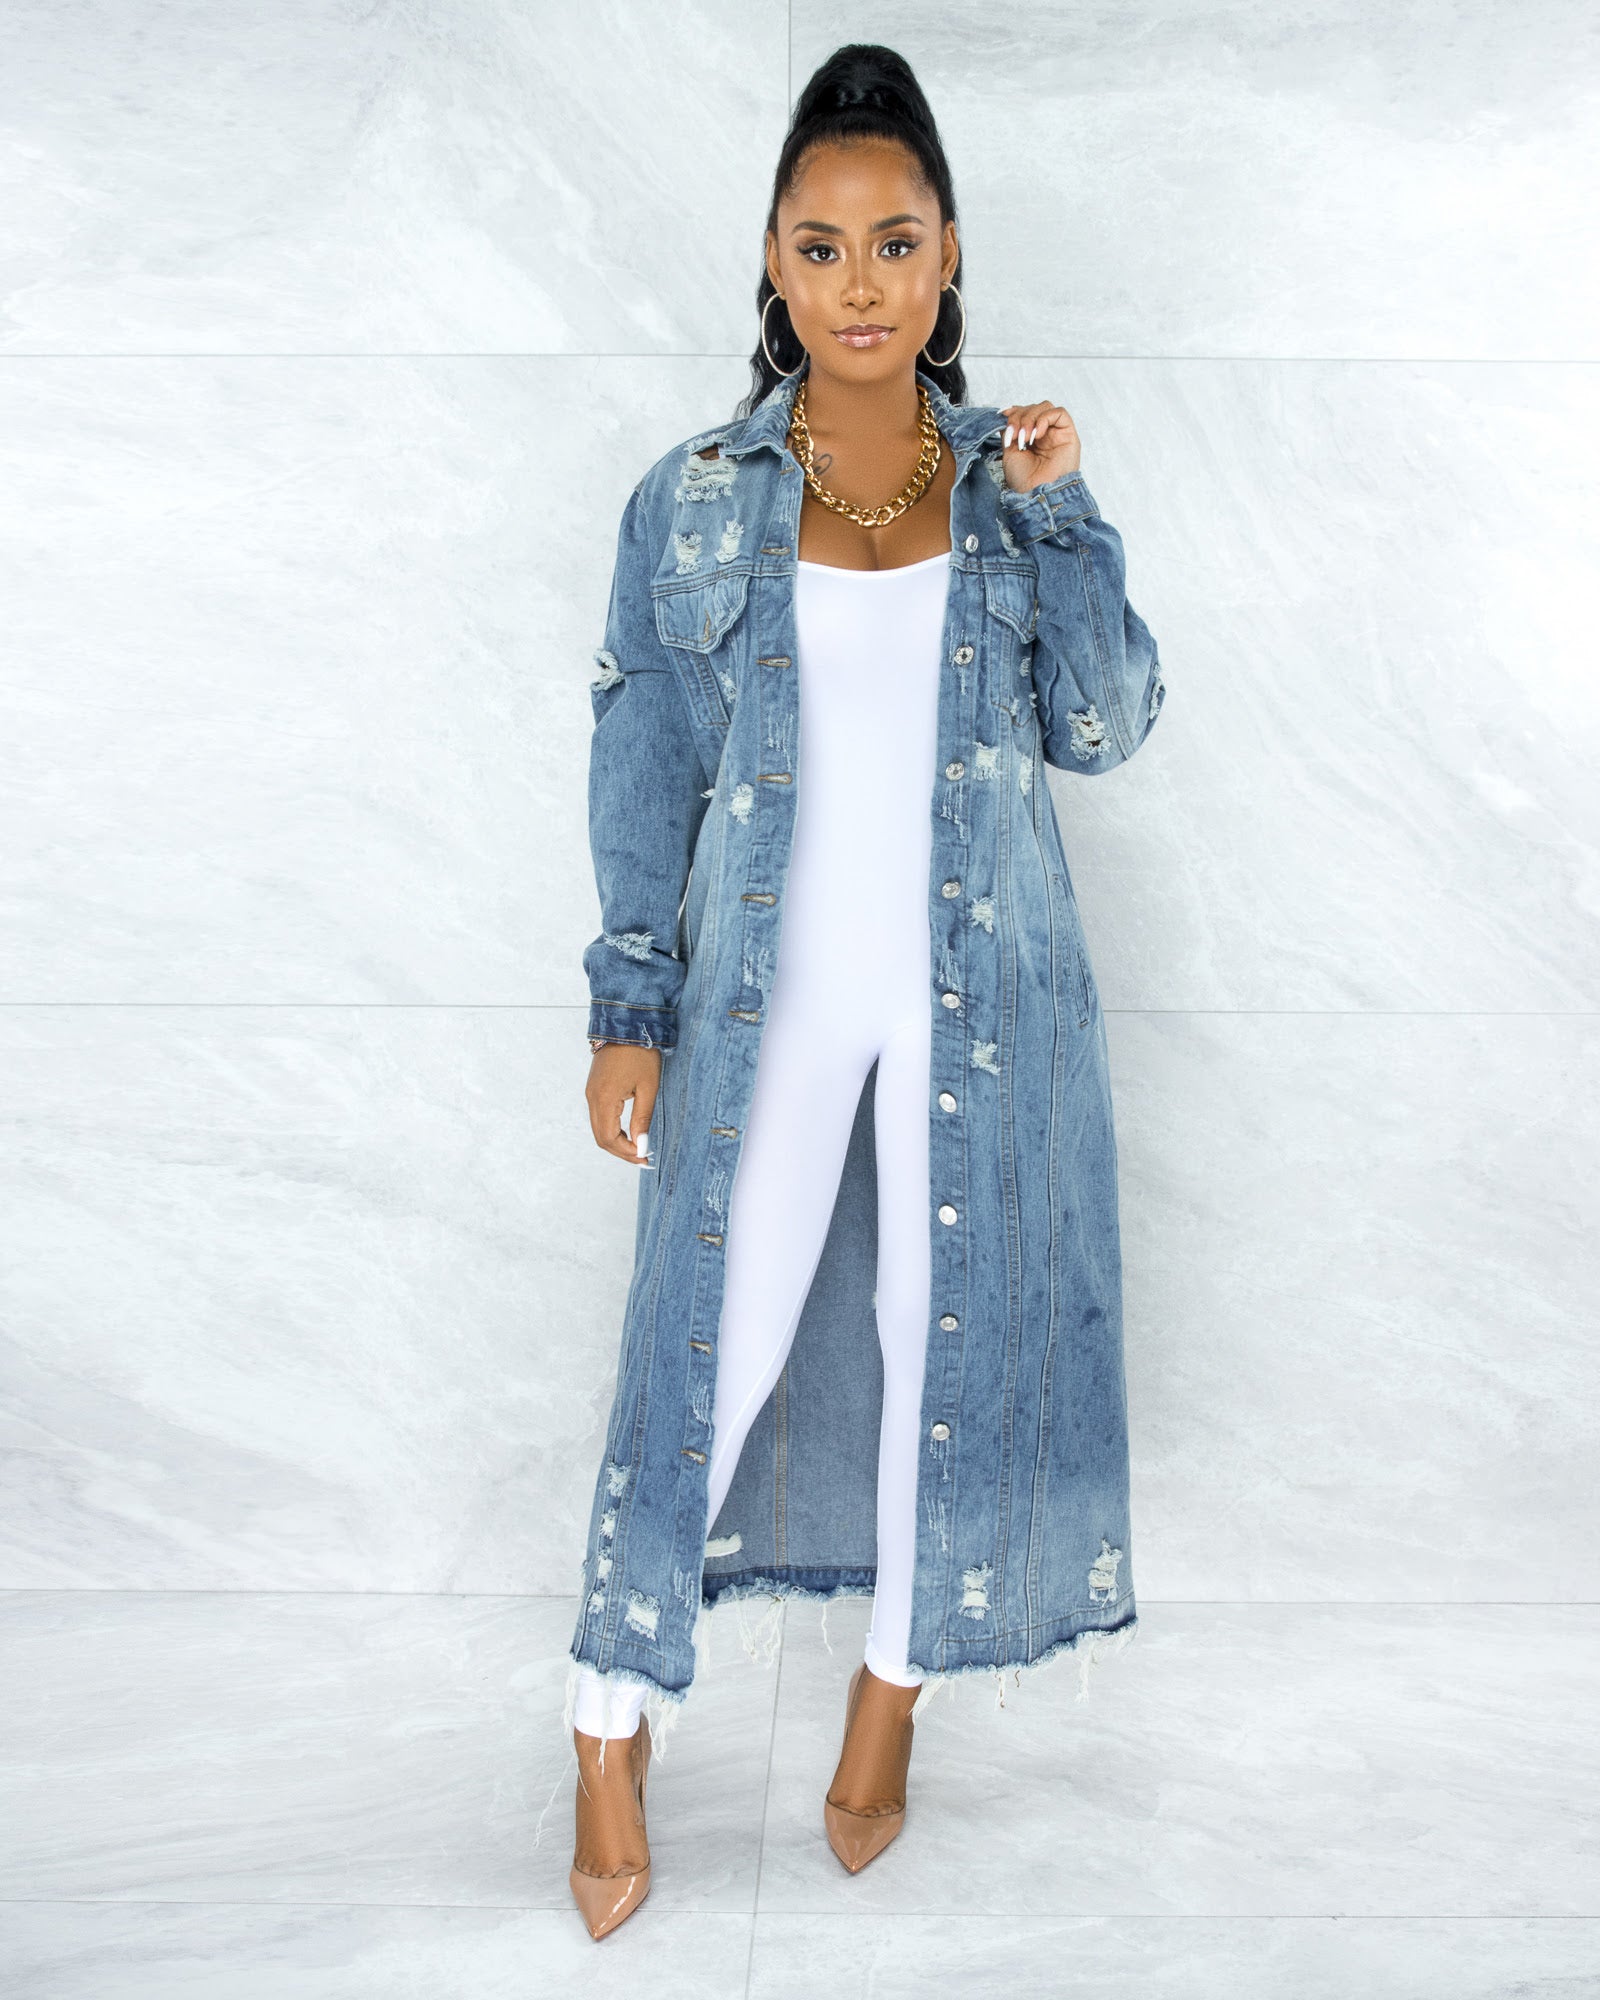 Medium Wash Denim Distressed Long Jacket with front silver metal button closure